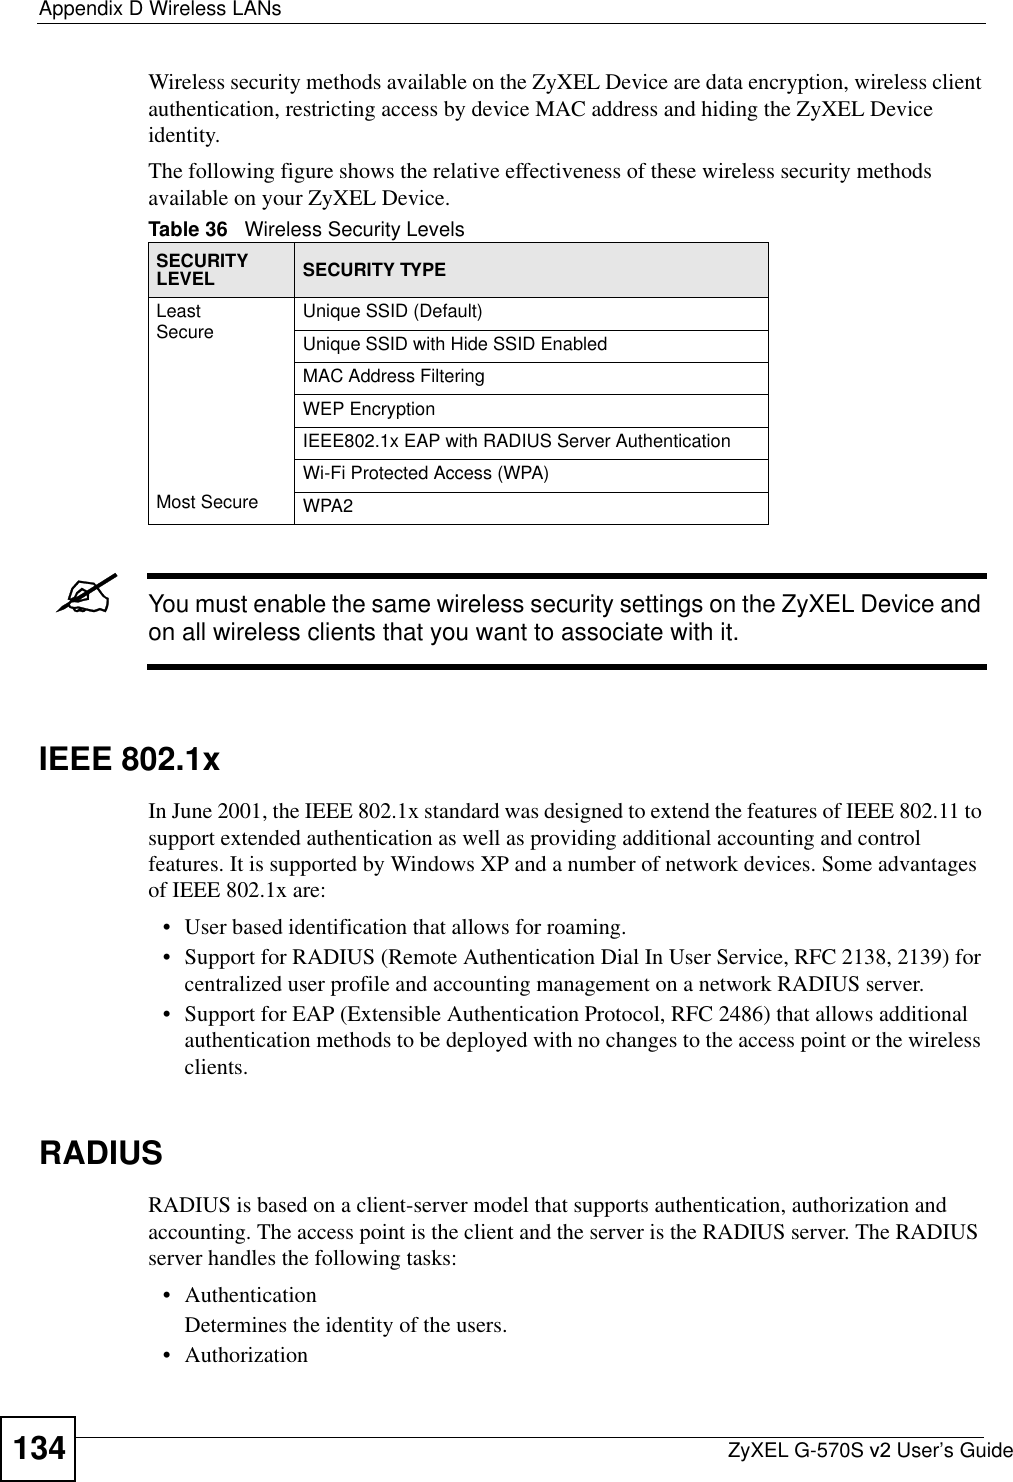 Appendix D Wireless LANsZyXEL G-570S v2 User’s Guide134Wireless security methods available on the ZyXEL Device are data encryption, wireless client authentication, restricting access by device MAC address and hiding the ZyXEL Device identity.The following figure shows the relative effectiveness of these wireless security methods available on your ZyXEL Device.&quot;You must enable the same wireless security settings on the ZyXEL Device and on all wireless clients that you want to associate with it. IEEE 802.1xIn June 2001, the IEEE 802.1x standard was designed to extend the features of IEEE 802.11 to support extended authentication as well as providing additional accounting and control features. It is supported by Windows XP and a number of network devices. Some advantages of IEEE 802.1x are:• User based identification that allows for roaming.• Support for RADIUS (Remote Authentication Dial In User Service, RFC 2138, 2139) for centralized user profile and accounting management on a network RADIUS server. • Support for EAP (Extensible Authentication Protocol, RFC 2486) that allows additional authentication methods to be deployed with no changes to the access point or the wireless clients.RADIUSRADIUS is based on a client-server model that supports authentication, authorization and accounting. The access point is the client and the server is the RADIUS server. The RADIUS server handles the following tasks:• Authentication Determines the identity of the users.• AuthorizationTable 36   Wireless Security LevelsSECURITY LEVEL SECURITY TYPELeast       S e c u r e                                                                                      Most SecureUnique SSID (Default)Unique SSID with Hide SSID EnabledMAC Address FilteringWEP EncryptionIEEE802.1x EAP with RADIUS Server AuthenticationWi-Fi Protected Access (WPA)WPA2